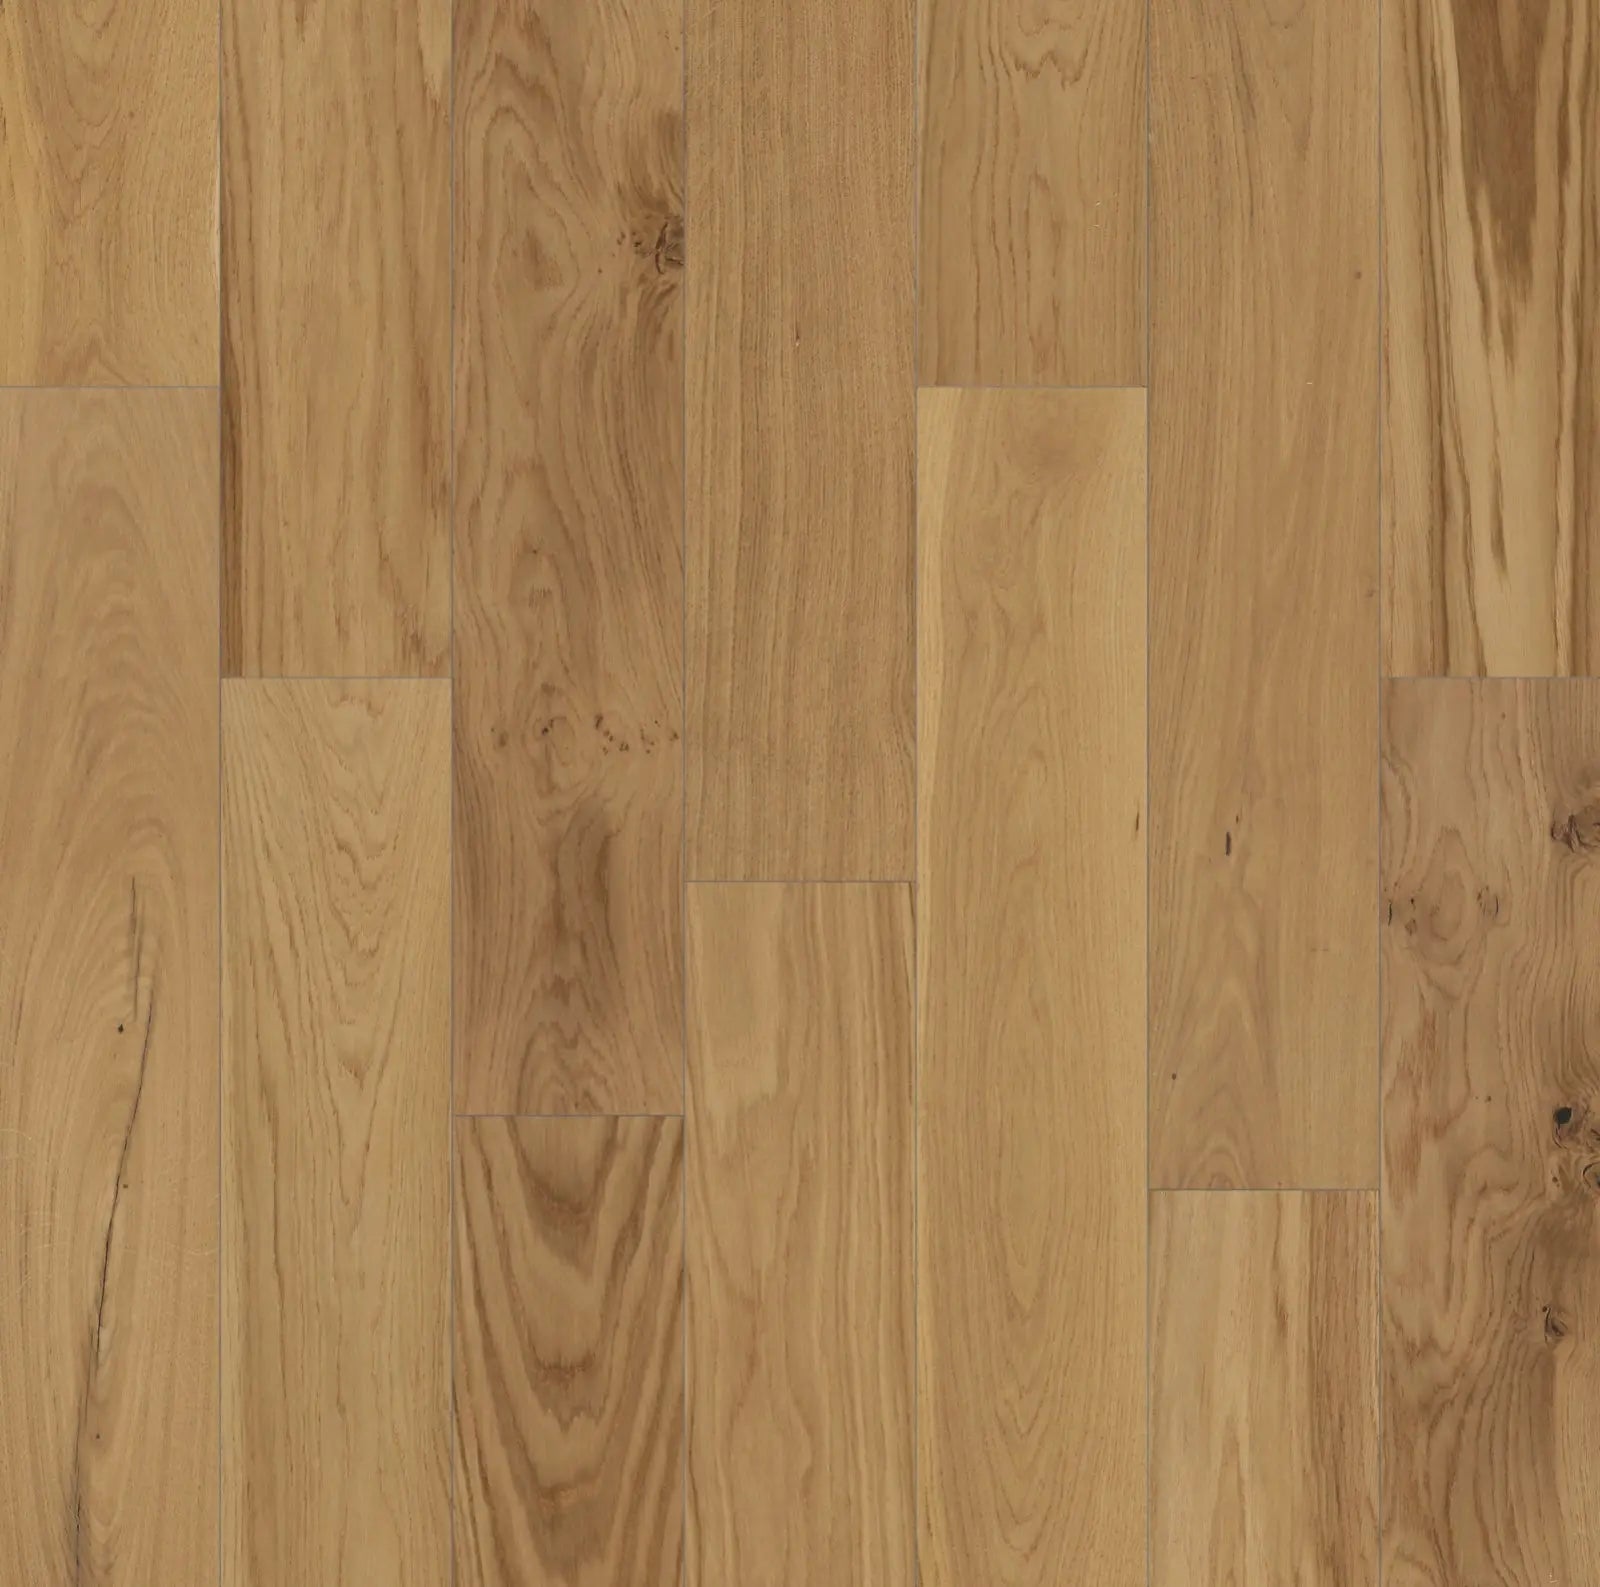 MSW67 Oak Riverwalk 5/8 x 7-1/2" Wire Brushed Engineered- Call 844-356-6711 for BEST price! MW floors